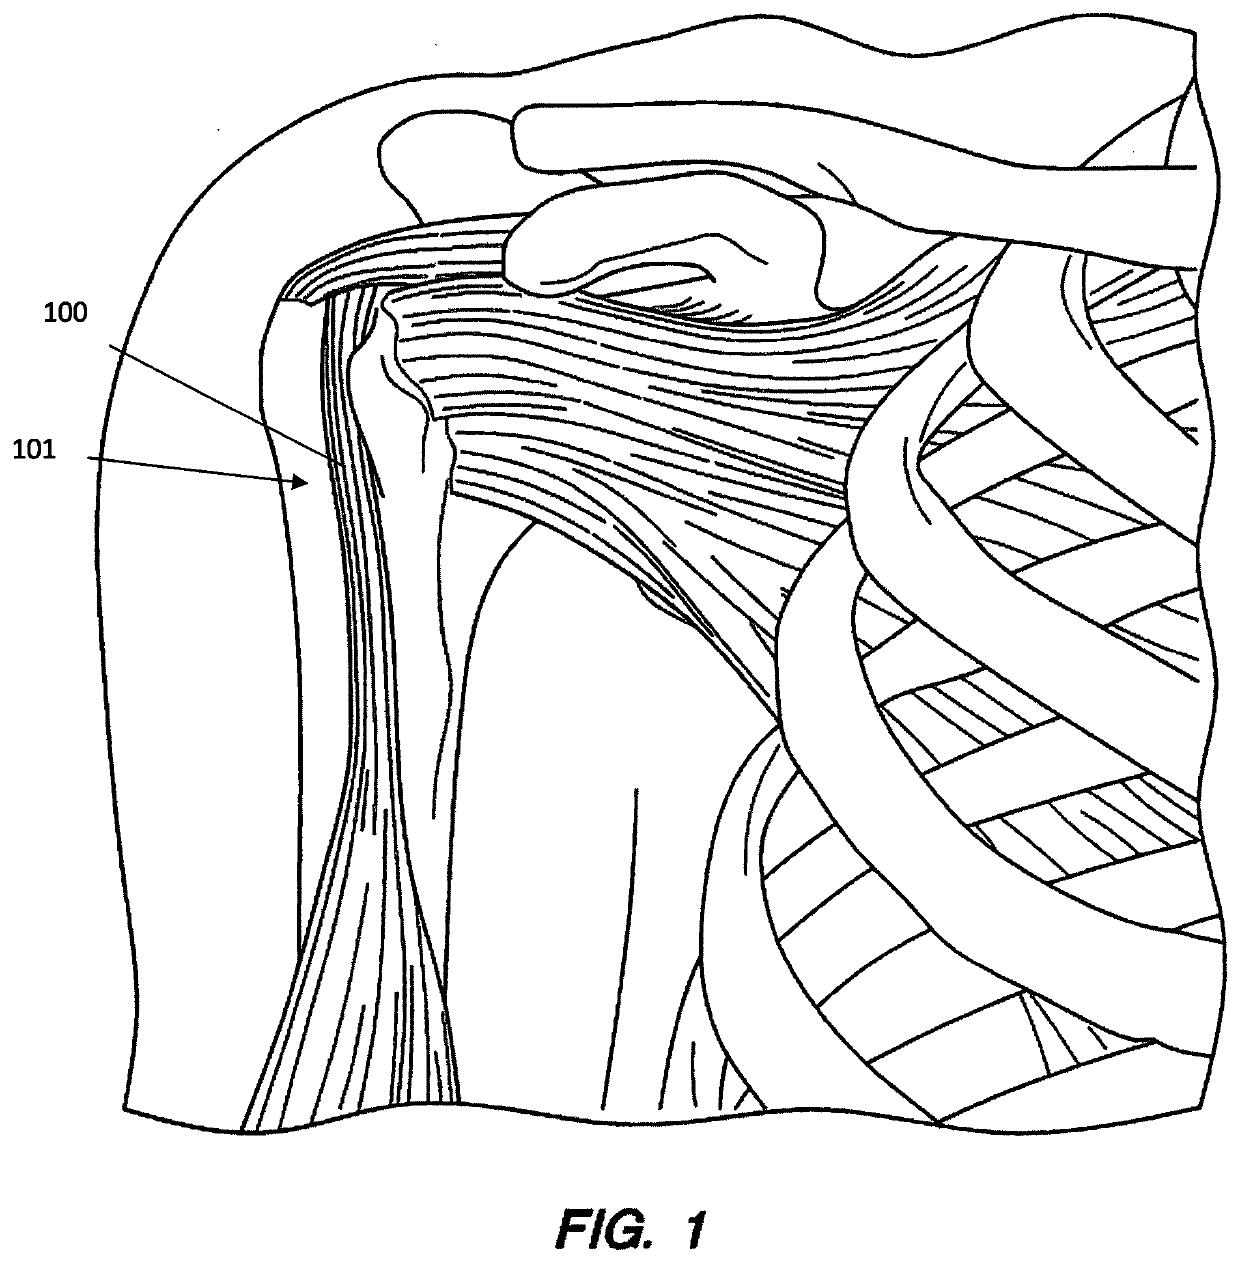 Direct soft tissue fixation implantable device and method of use